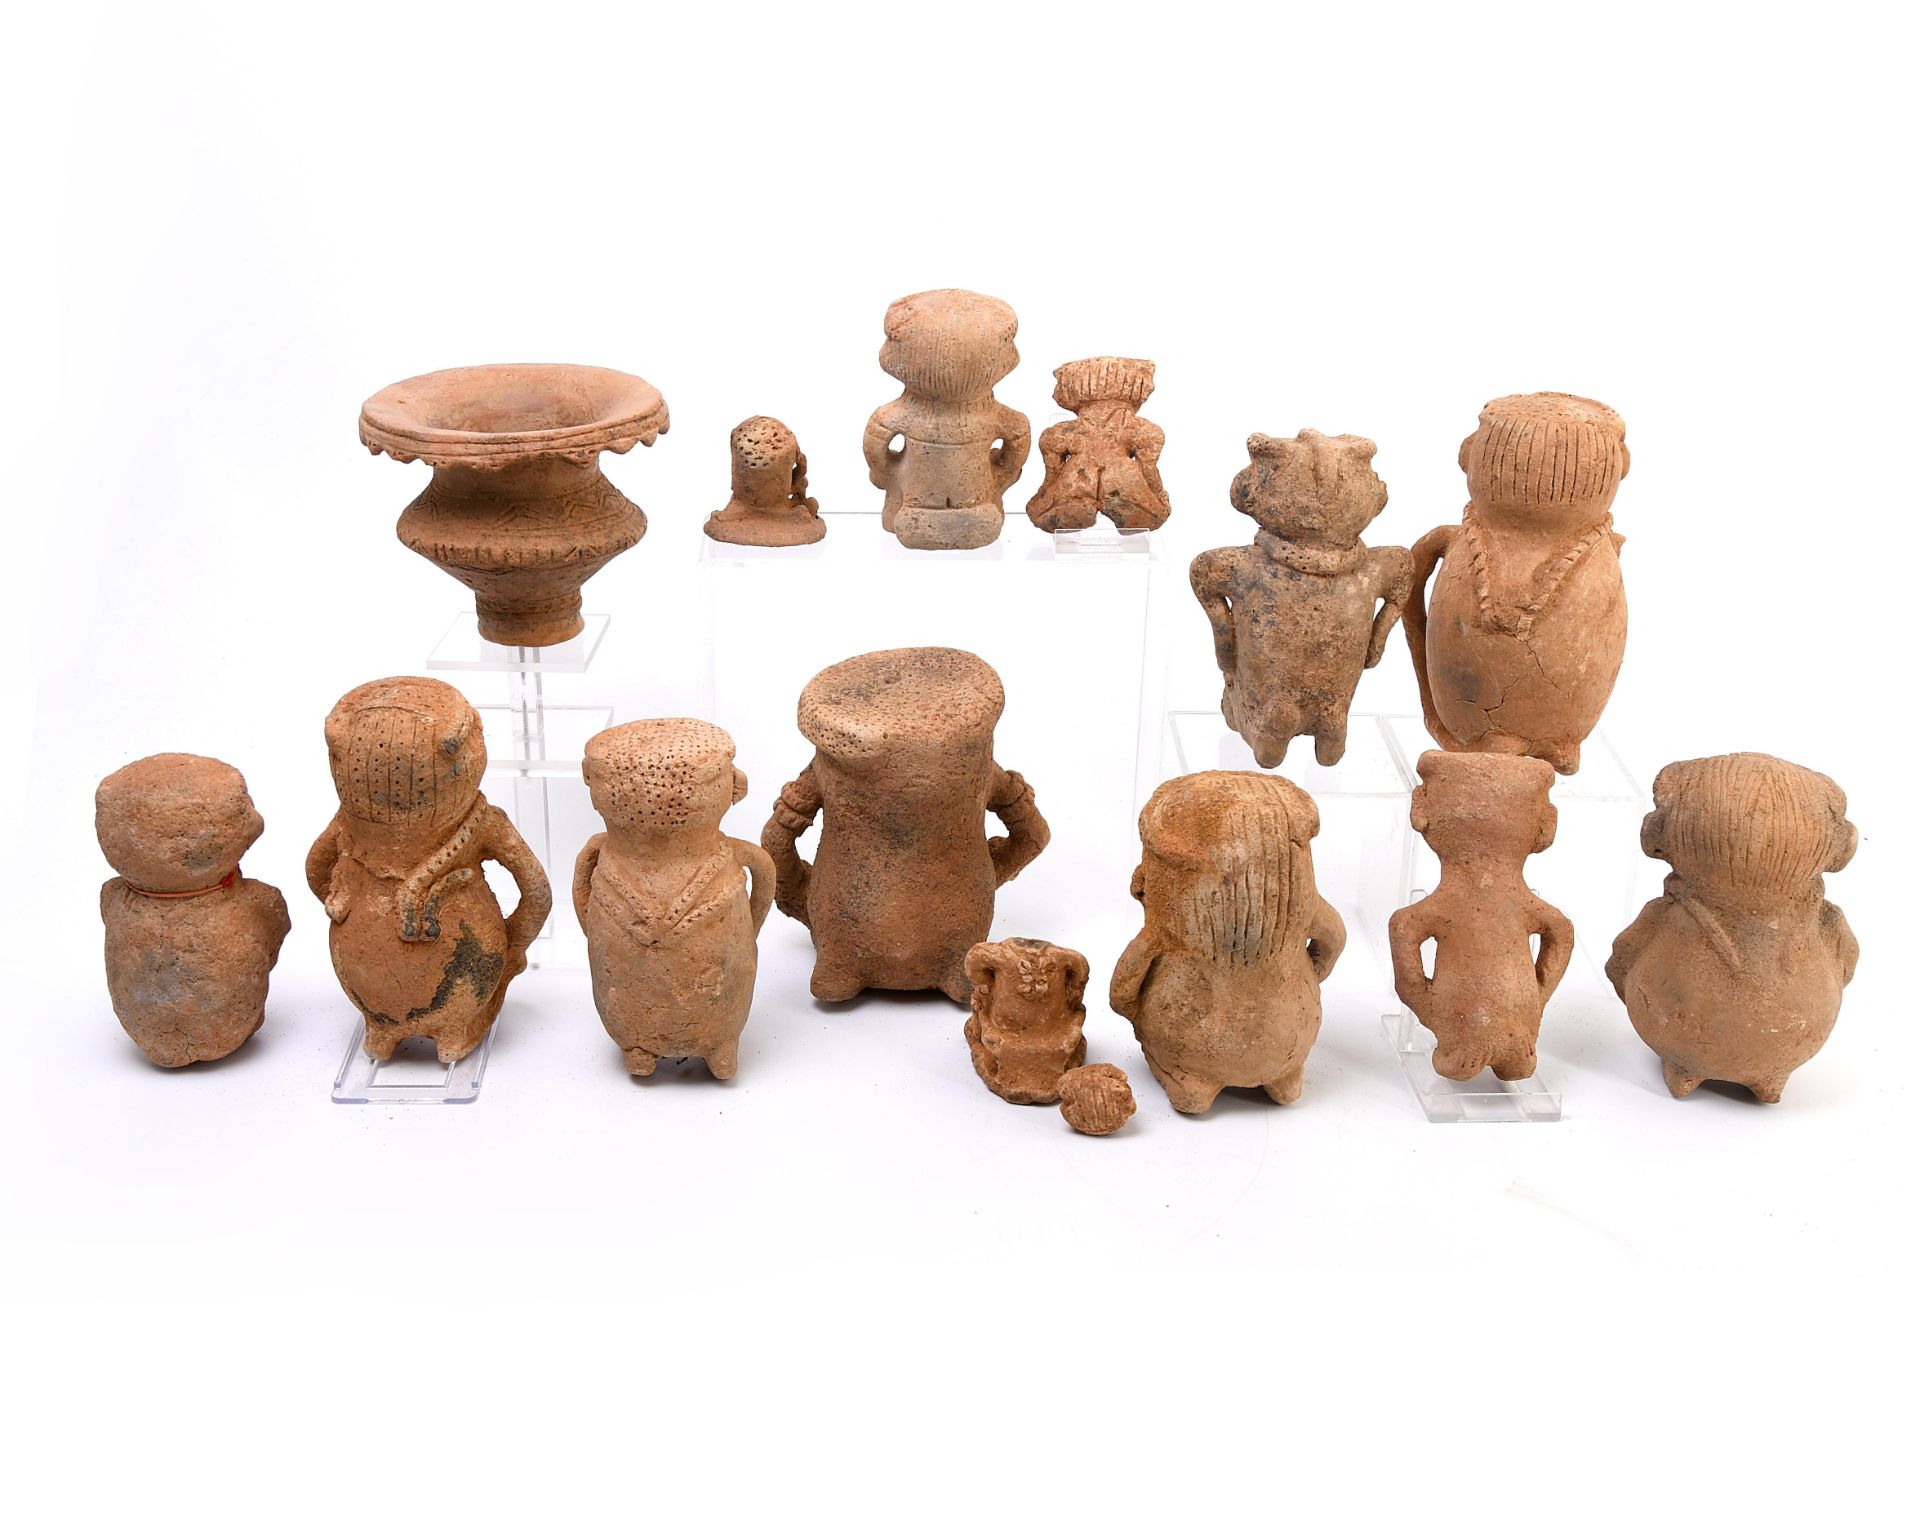 Colombia, Sinu region, a collection of fourteen various terracotta figures, ca. 1200-1400 AD. - Image 6 of 9